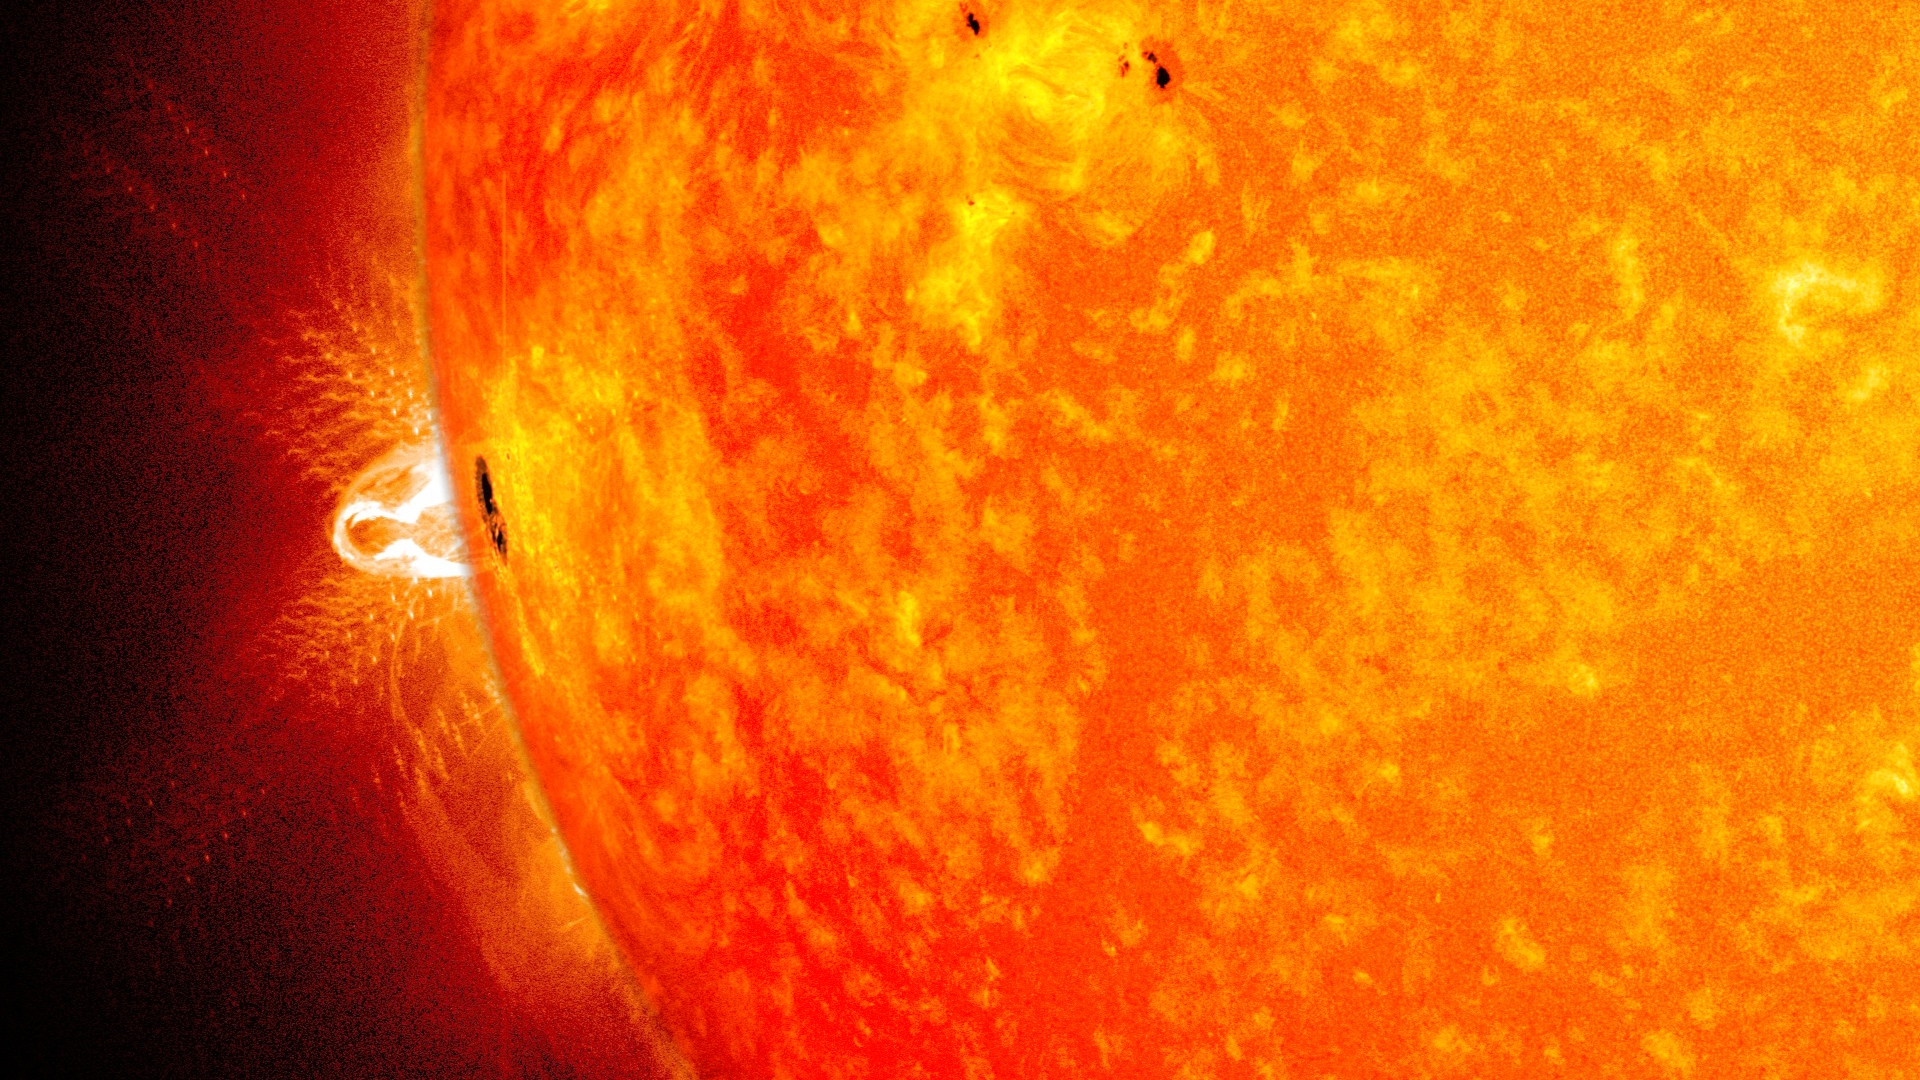 A giant sunspot appeared on Feb. 25, 2014, for its third trip across the face of the sun. This blend of two images from NASA's Solar Dynamics Observatory shows the sunspot in visible light and an X-class flare observable in ultraviolet light.Image Credit: NASA/SDO/Goddard Space Flight Center